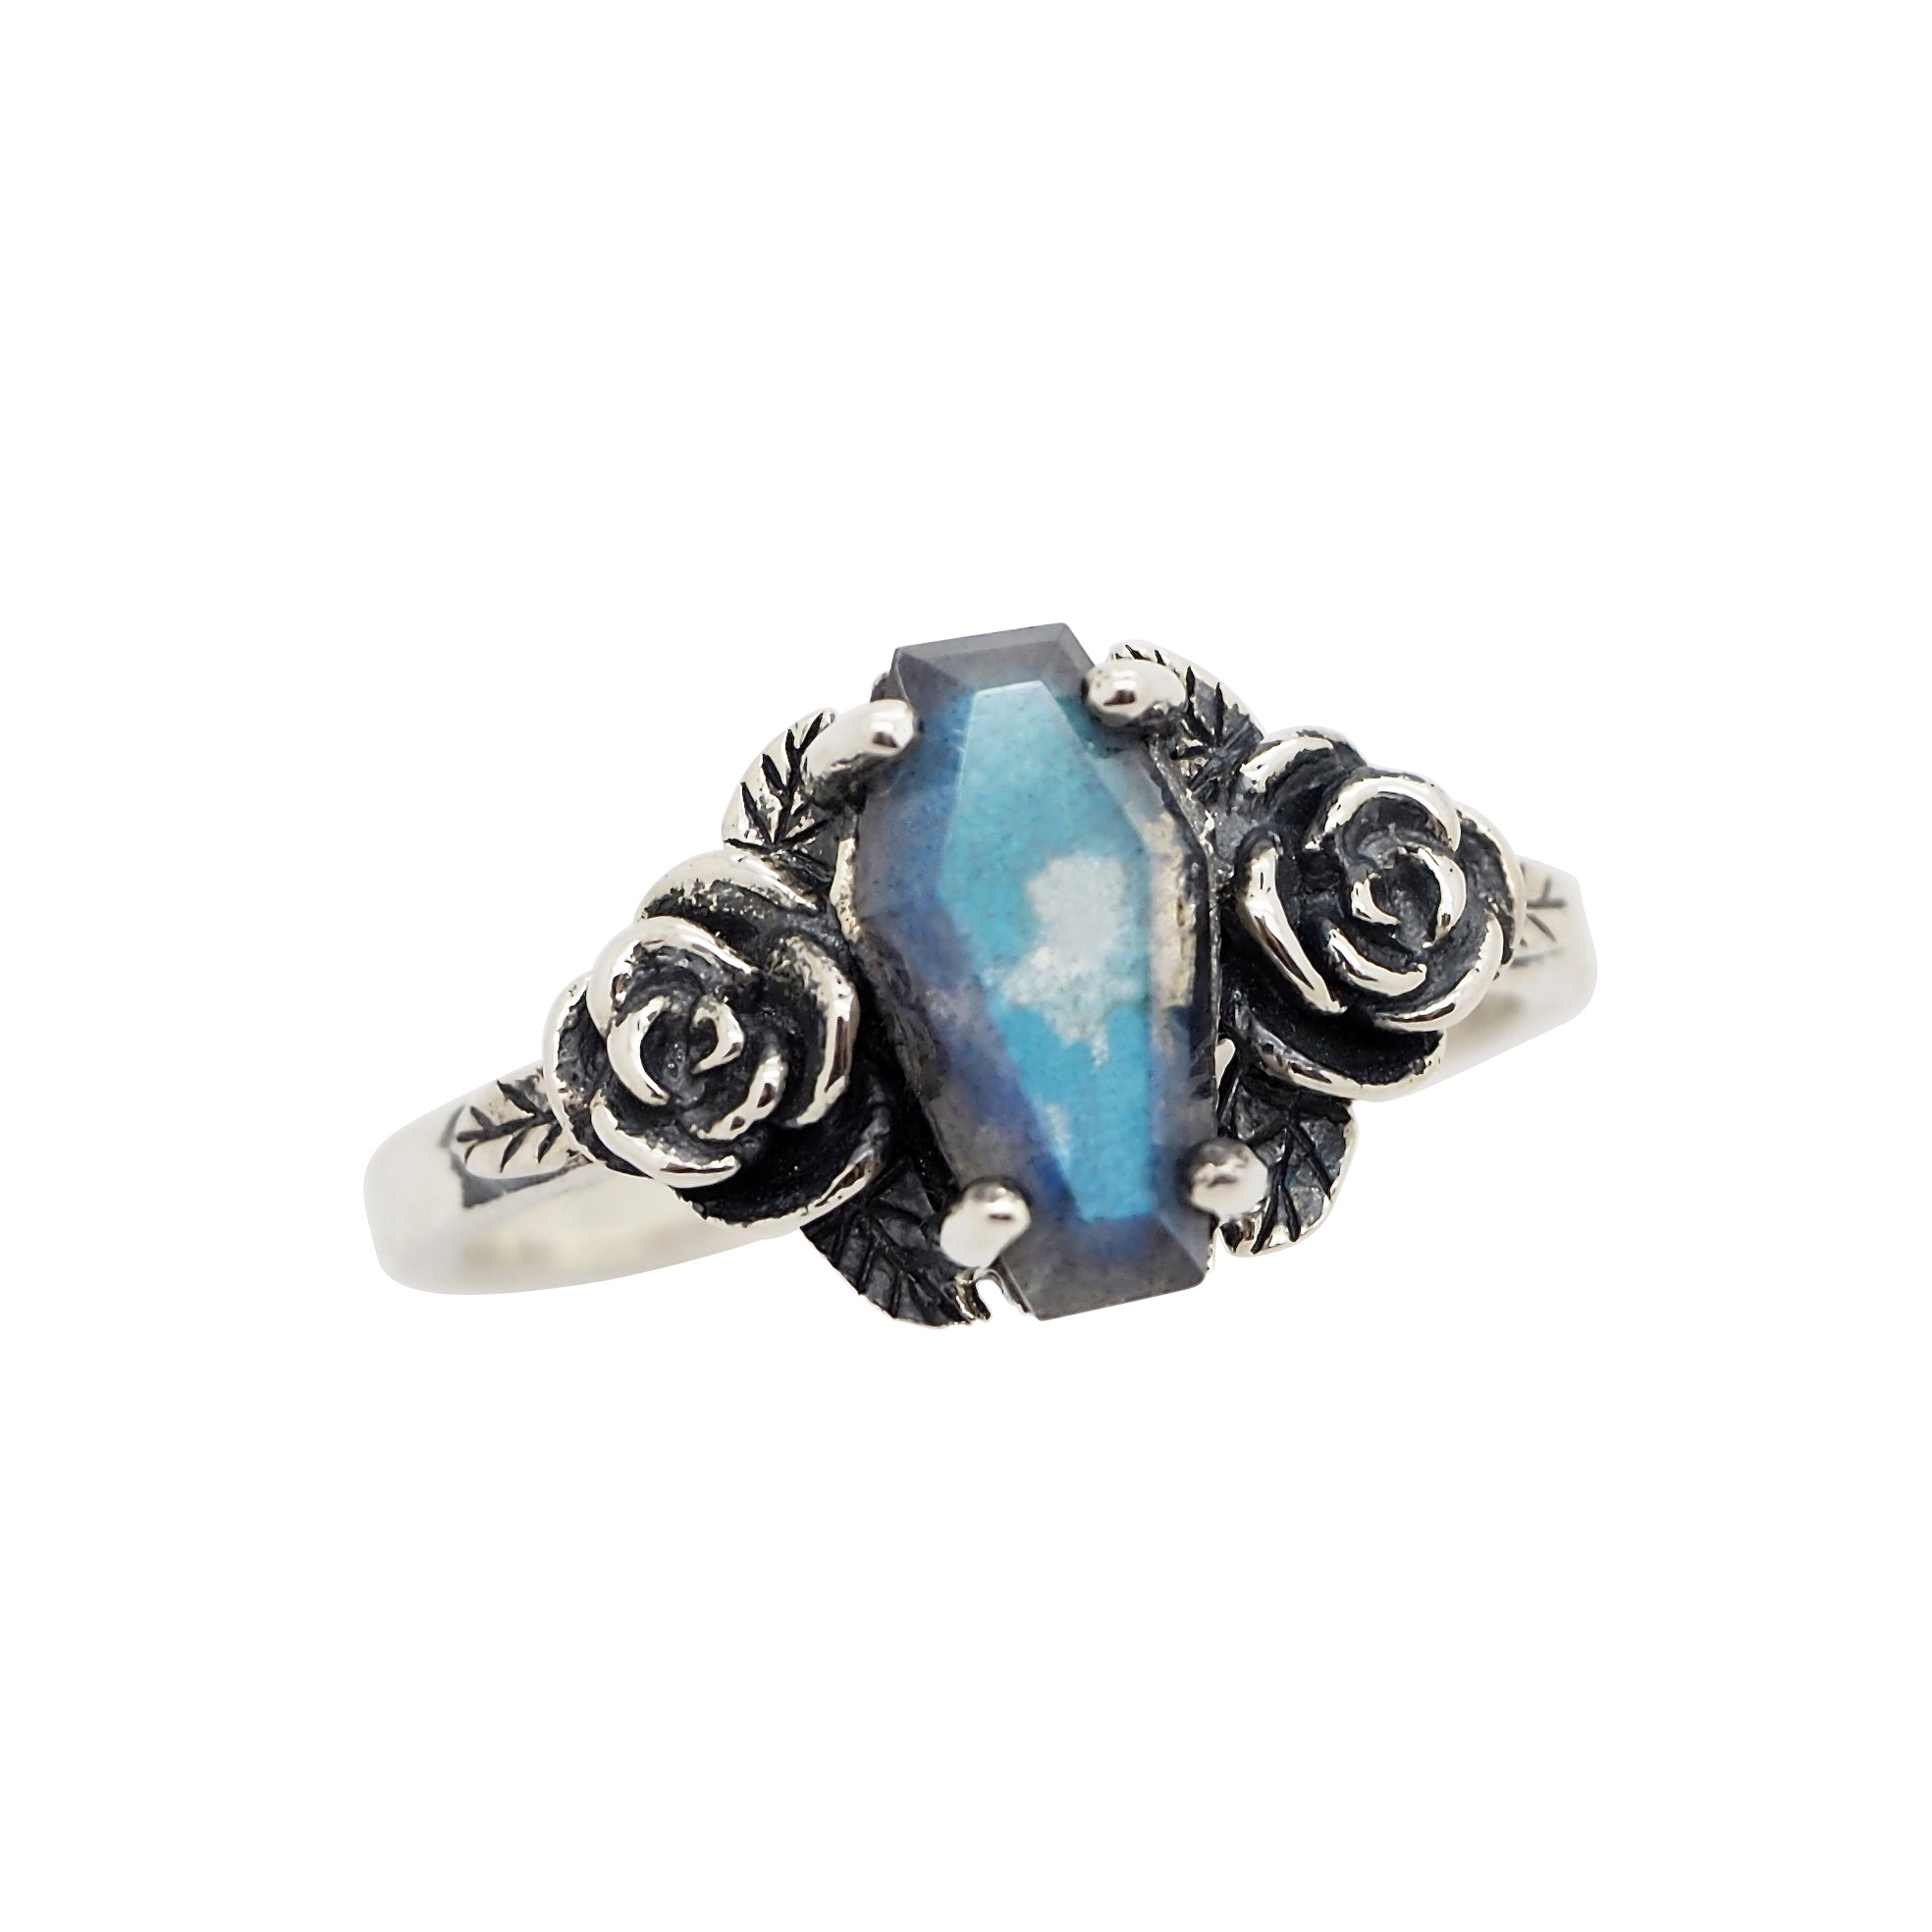 Labradorite 'Buried Beneath The Roses' Coffin Ring